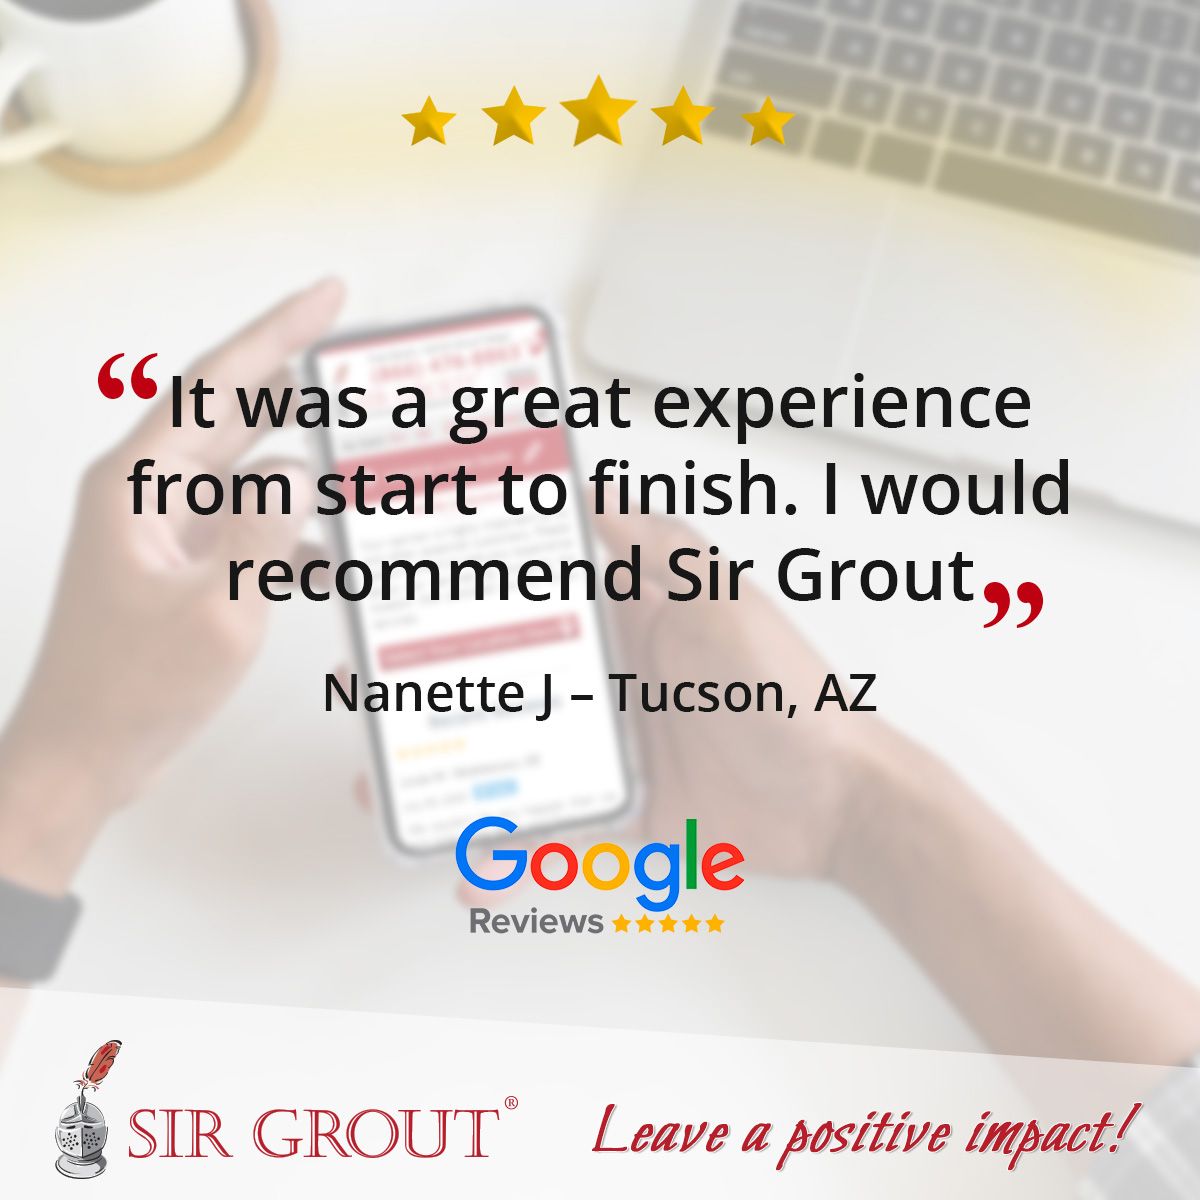 It was a great experience from start to finish. I would recommend Sir Grout.